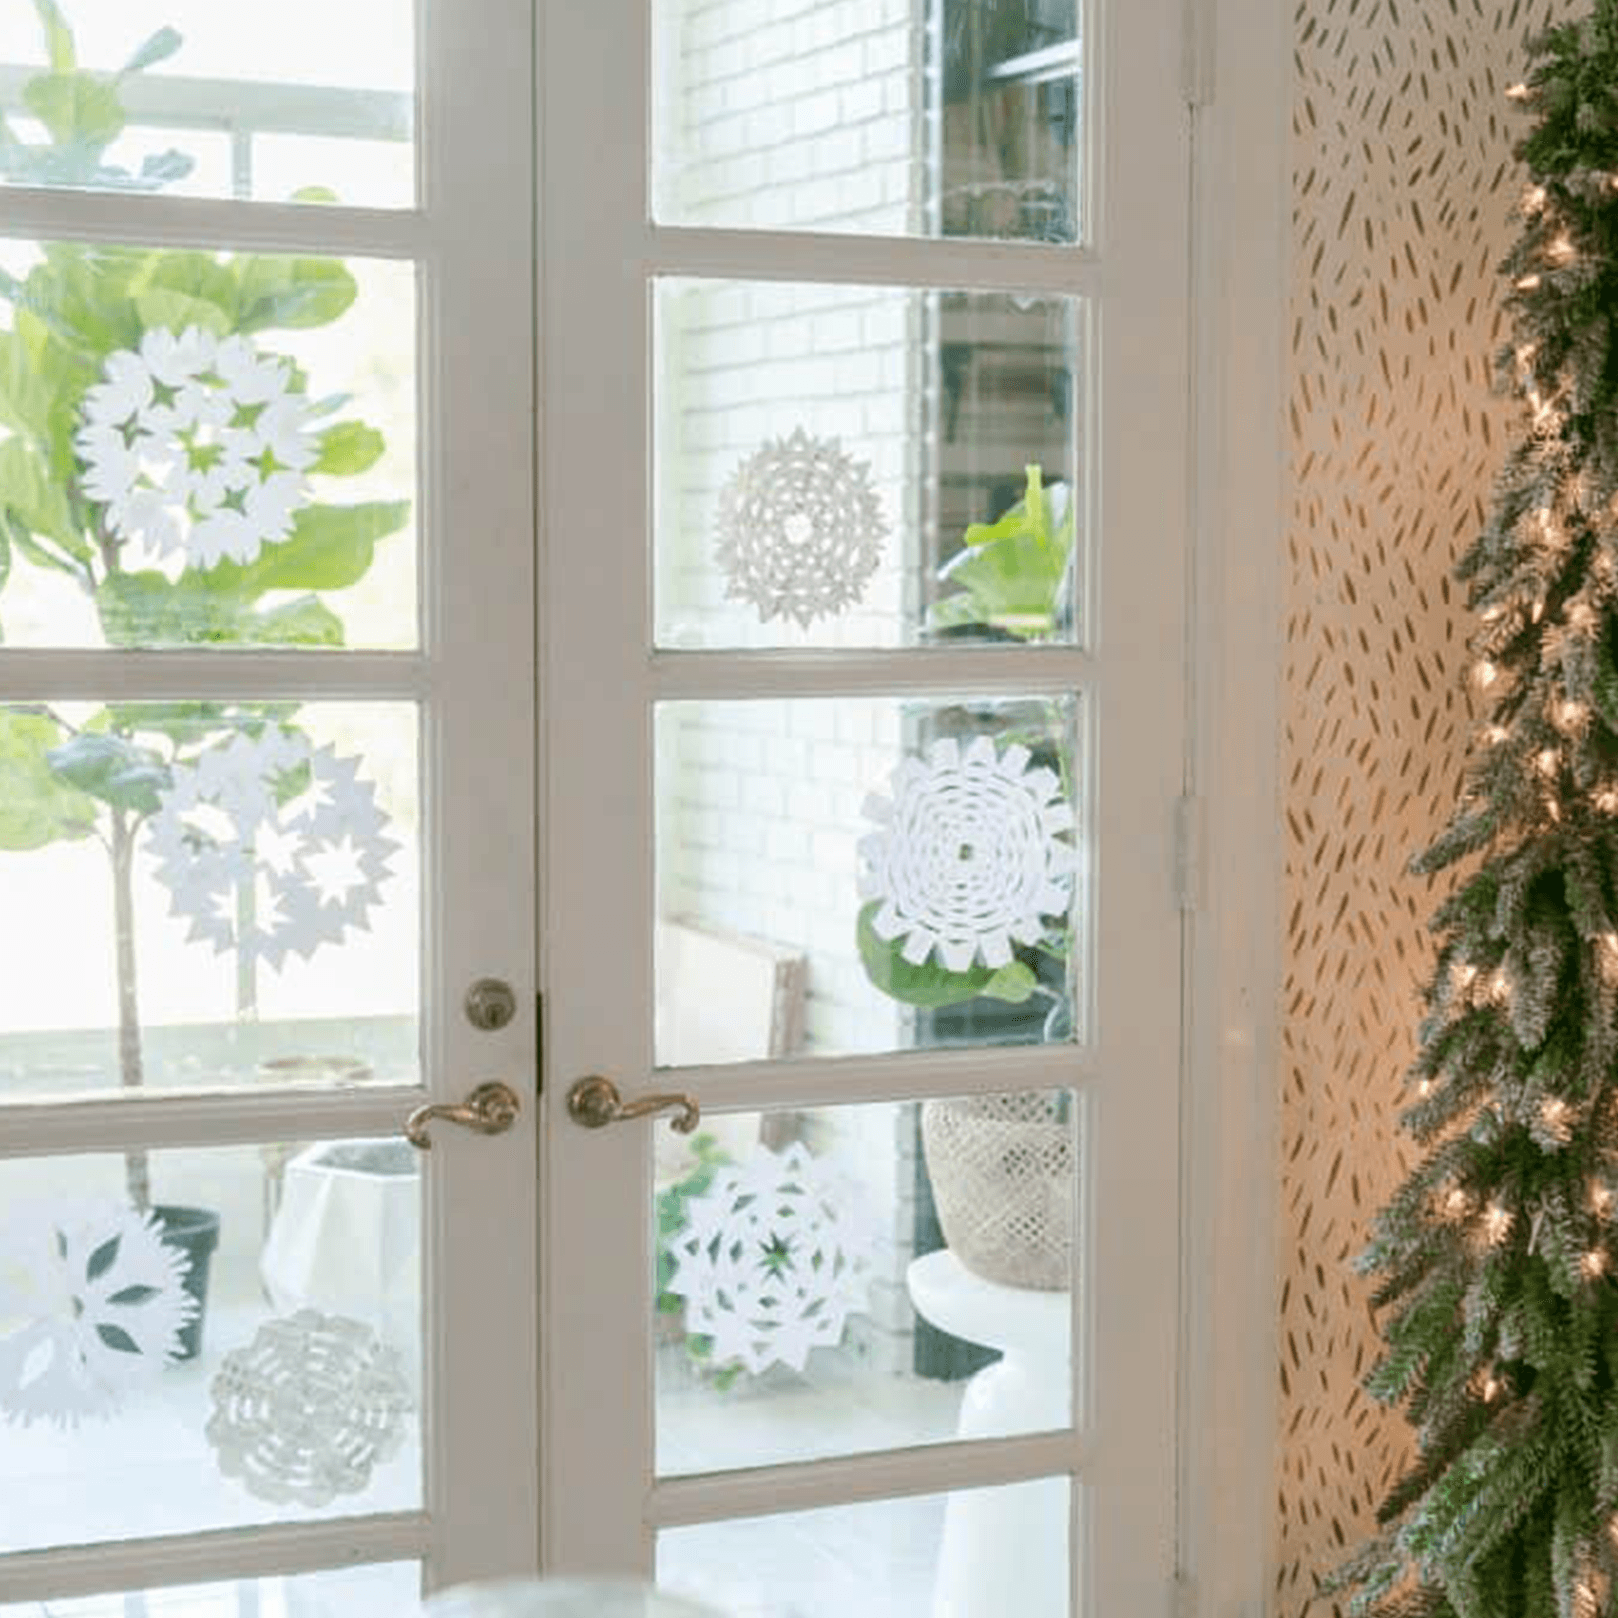 Our Favorite Christmas Decorations Ideas from Table to Tree